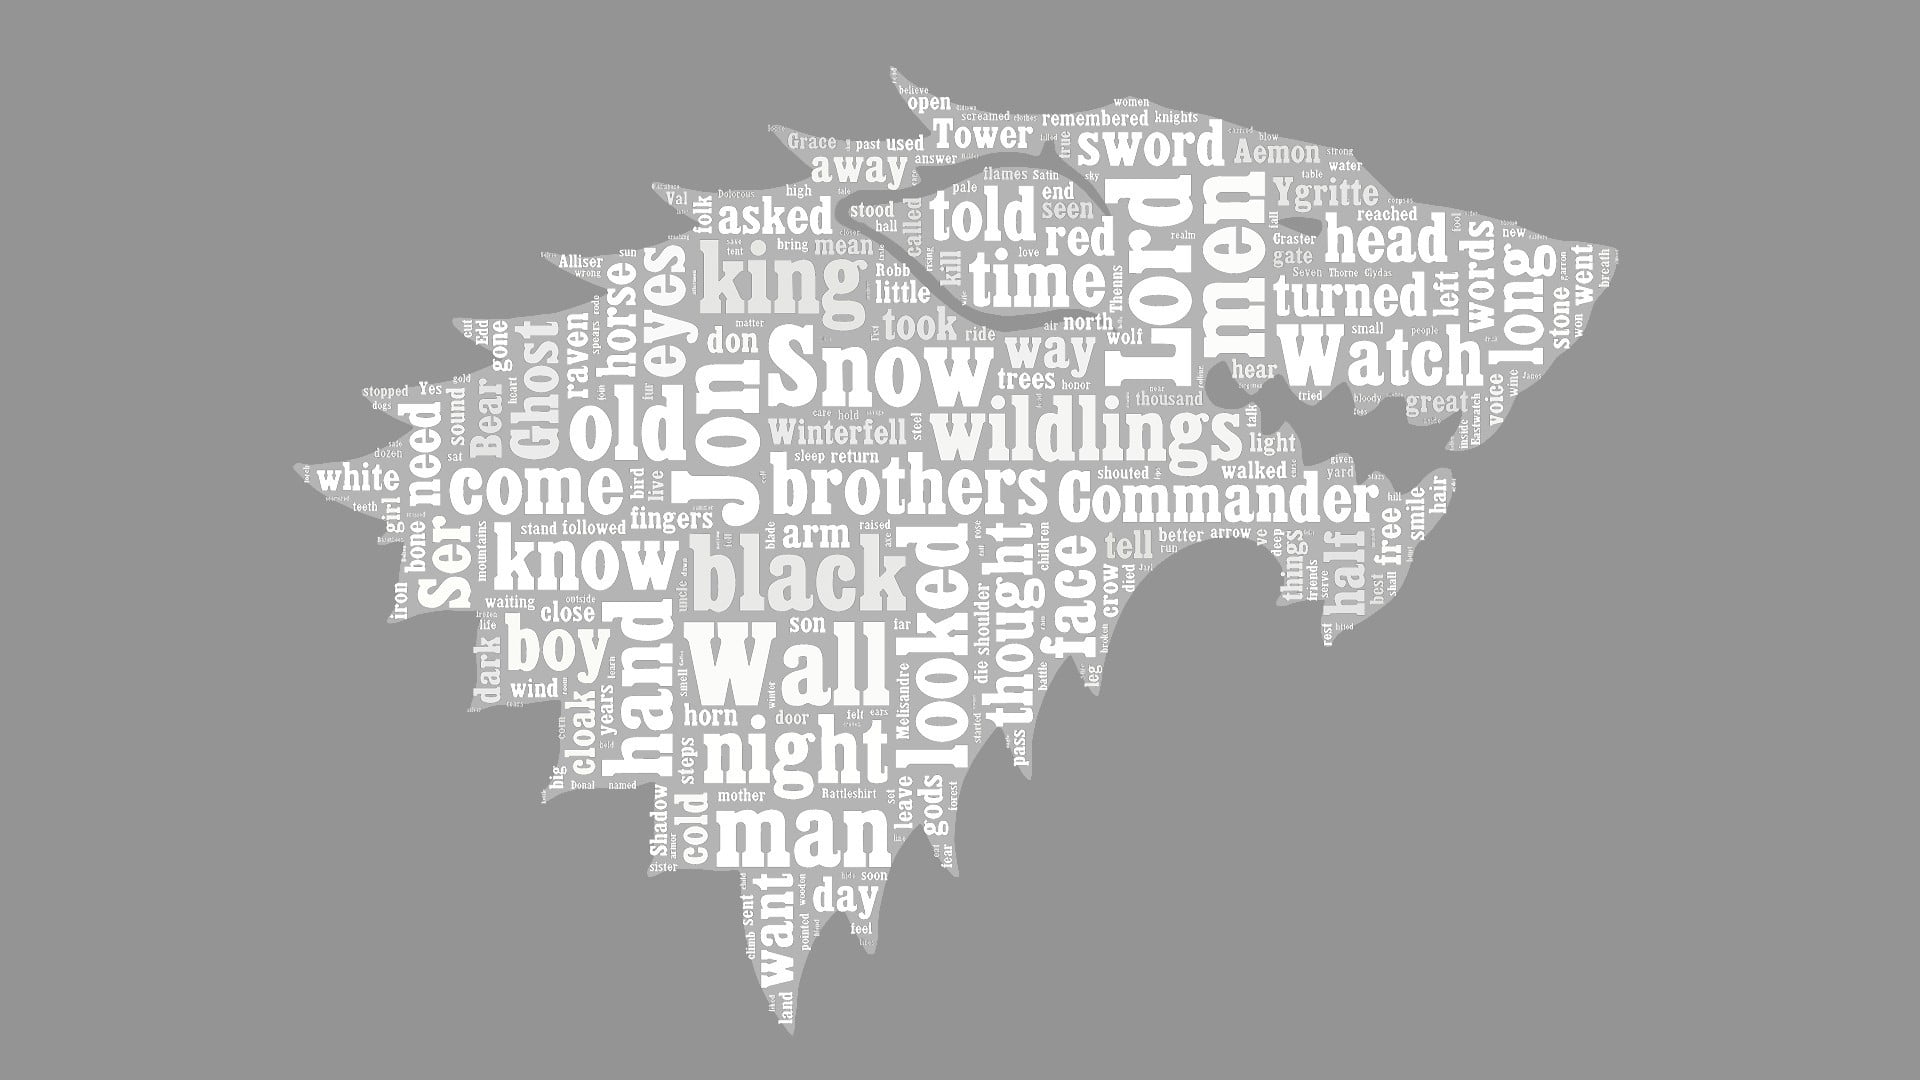 Game of Thrones House Stark wallpaper, Game of Thrones, A Song of Ice and Fire